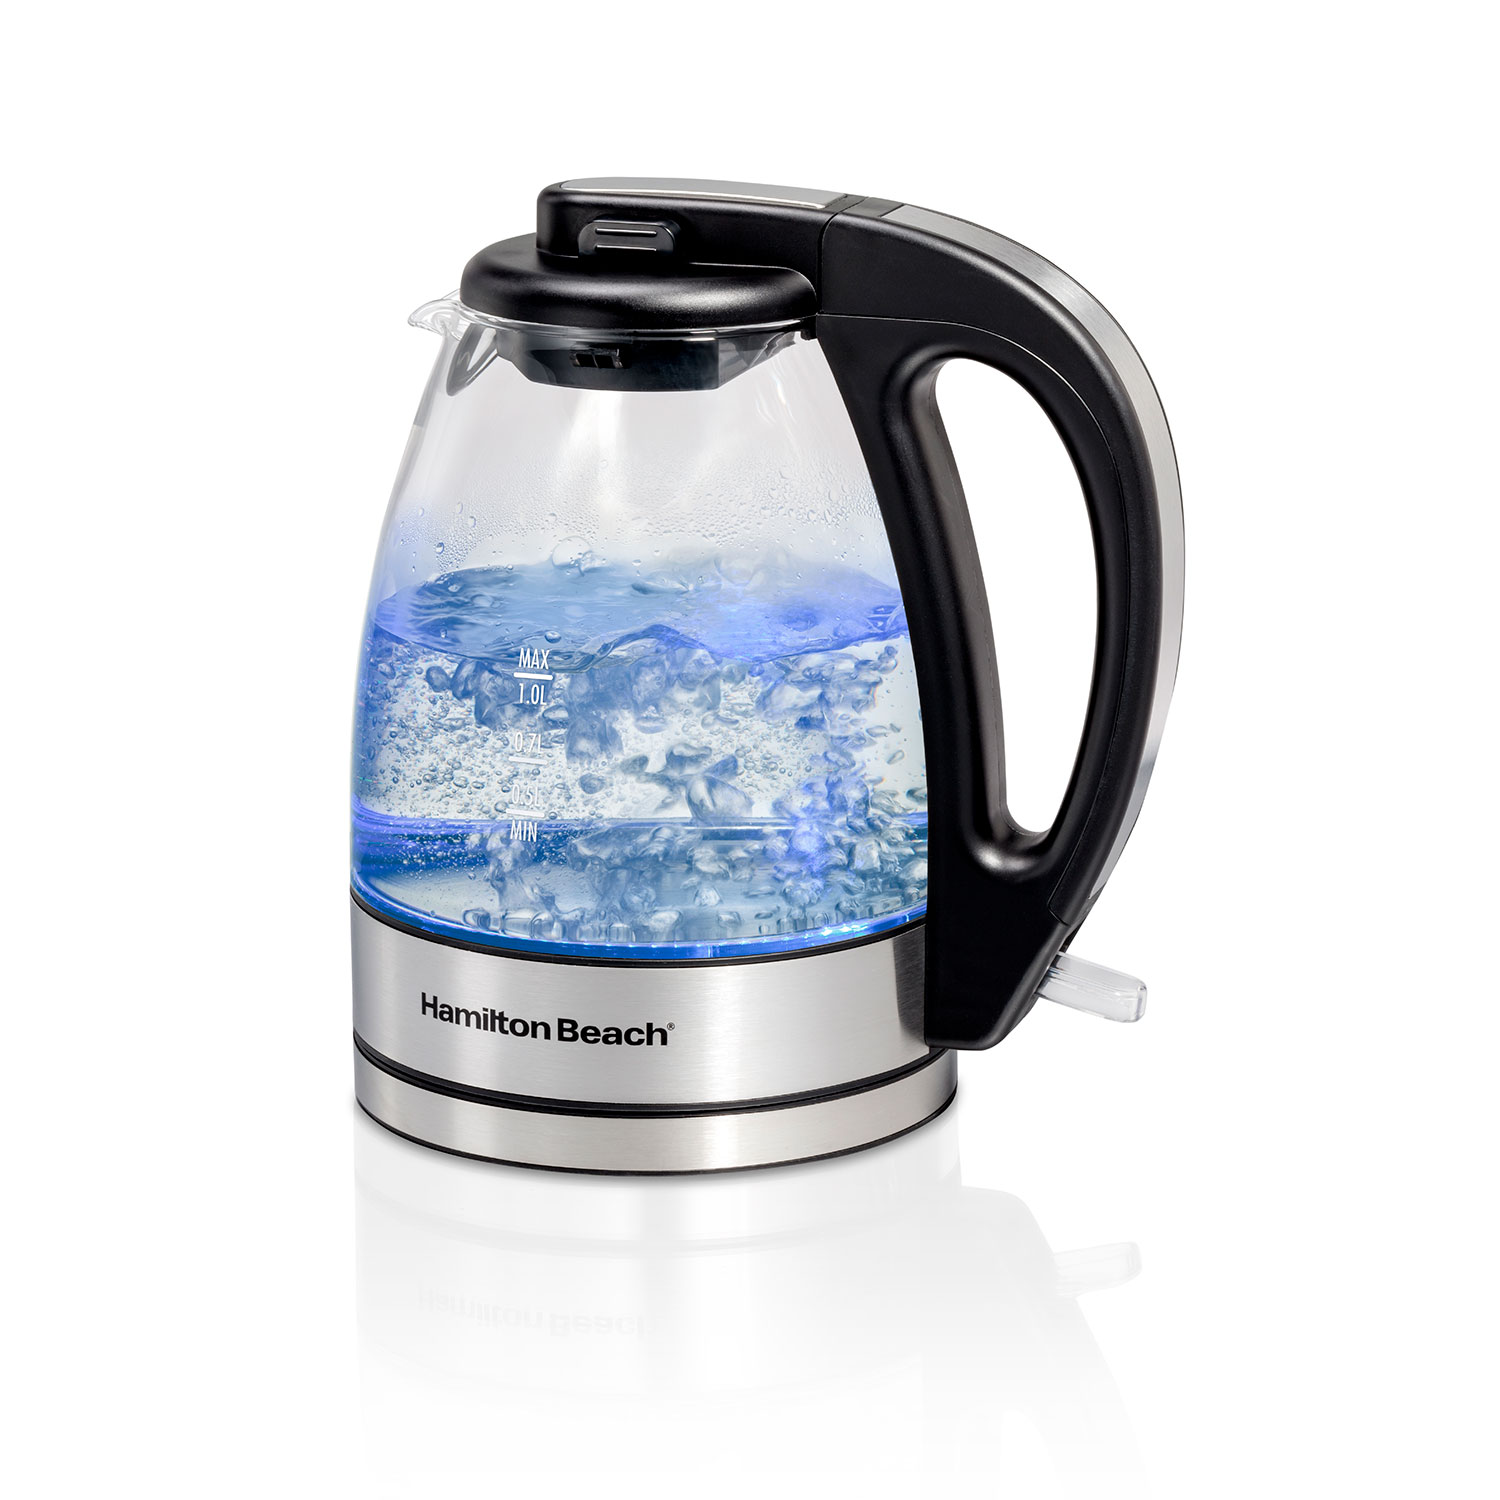 Compact 1 Liter Glass Kettle (40930)